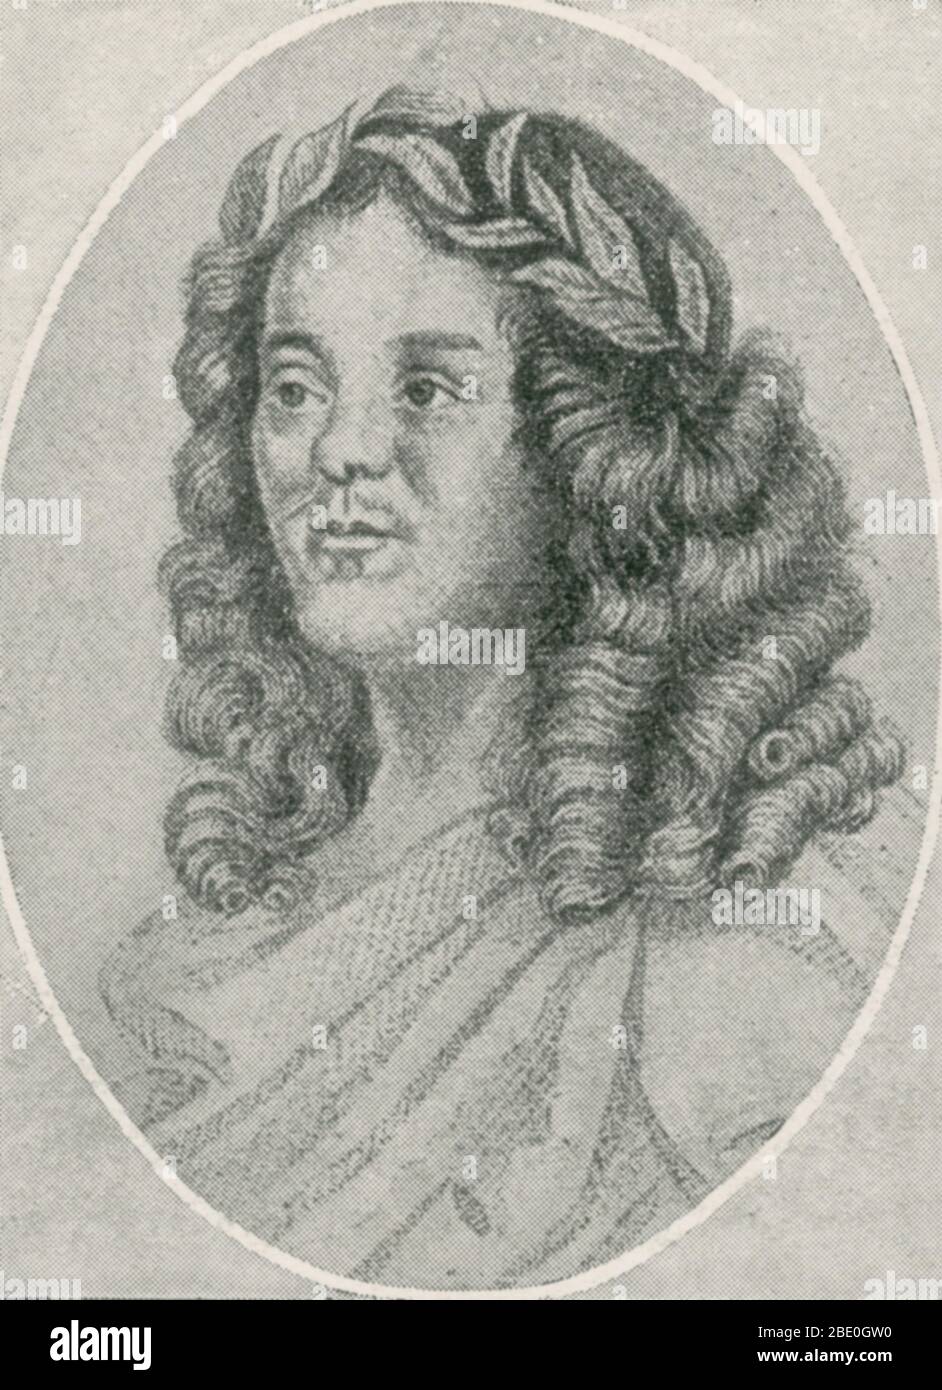 Sir William Davenant (1606-1668), also spelled D'Avenant, was an English poet and playwright. He was one of the rare figures in English Renaissance theatre whose career spanned both the Caroline and Restoration eras and who was active both before and after the English Civil War and during the Interregnum. Poet Laureate, 1637-1668. Stock Photo